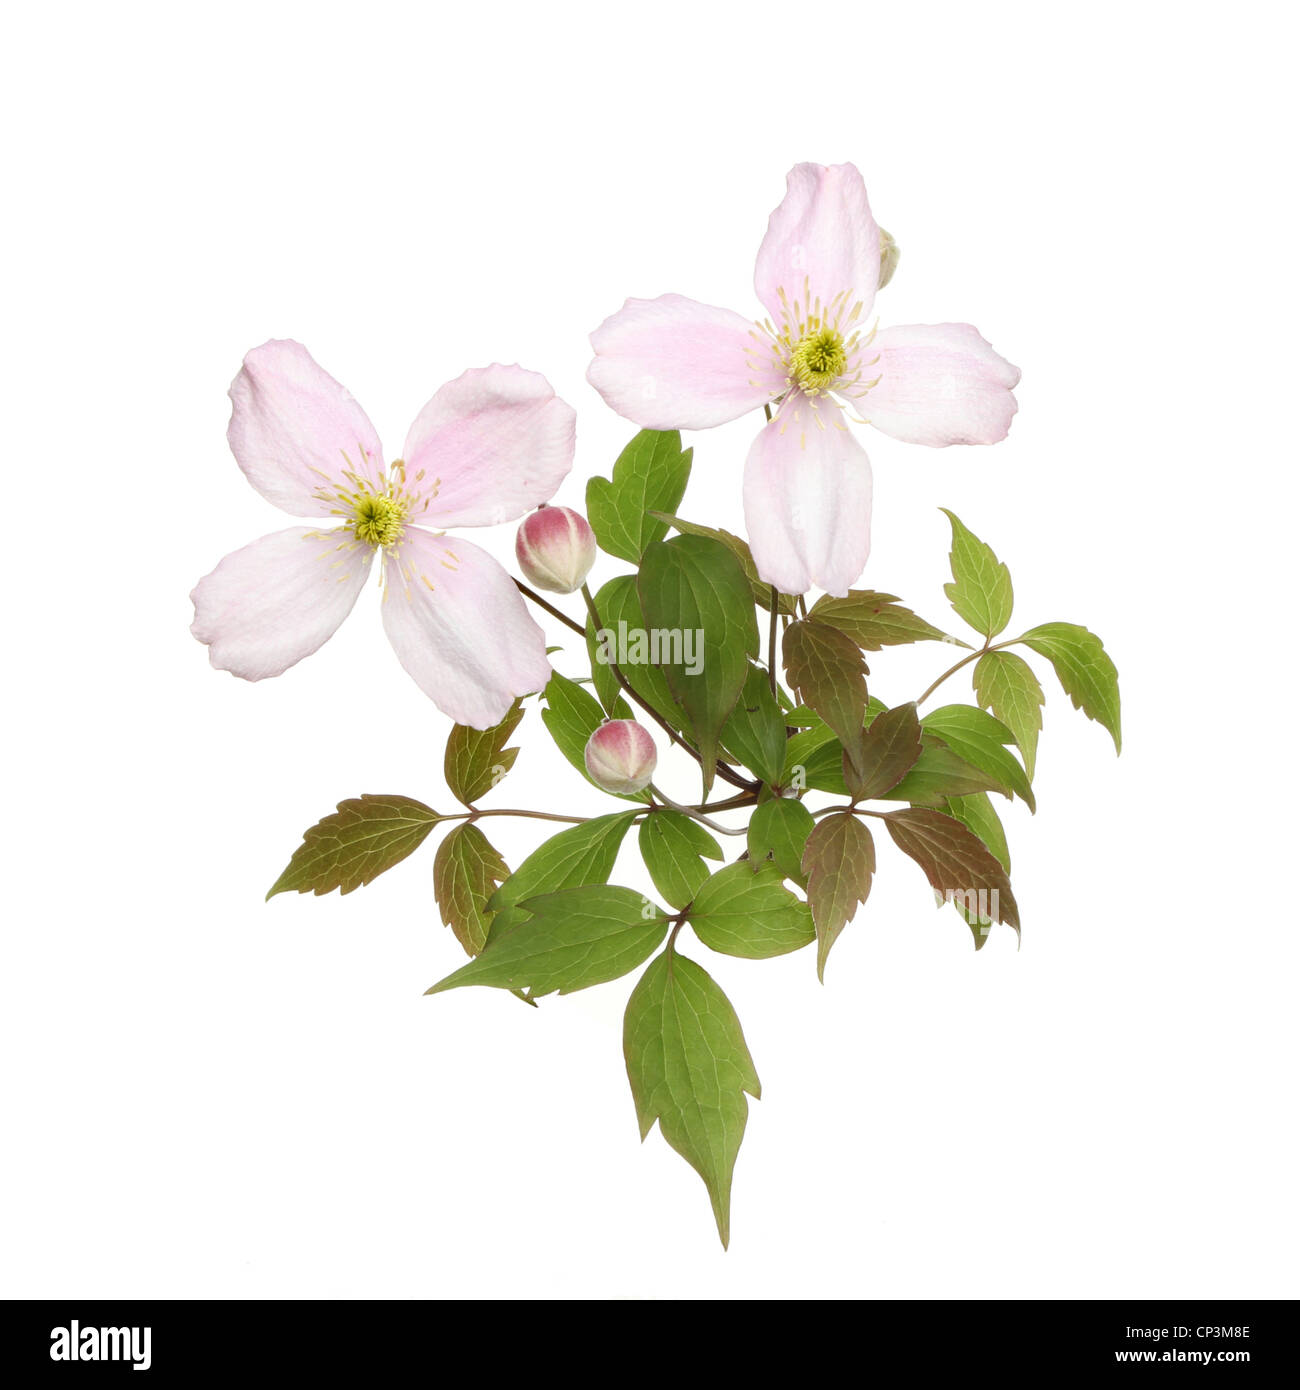 Clematis montana flowers buds and leaves isolated against white Stock Photo